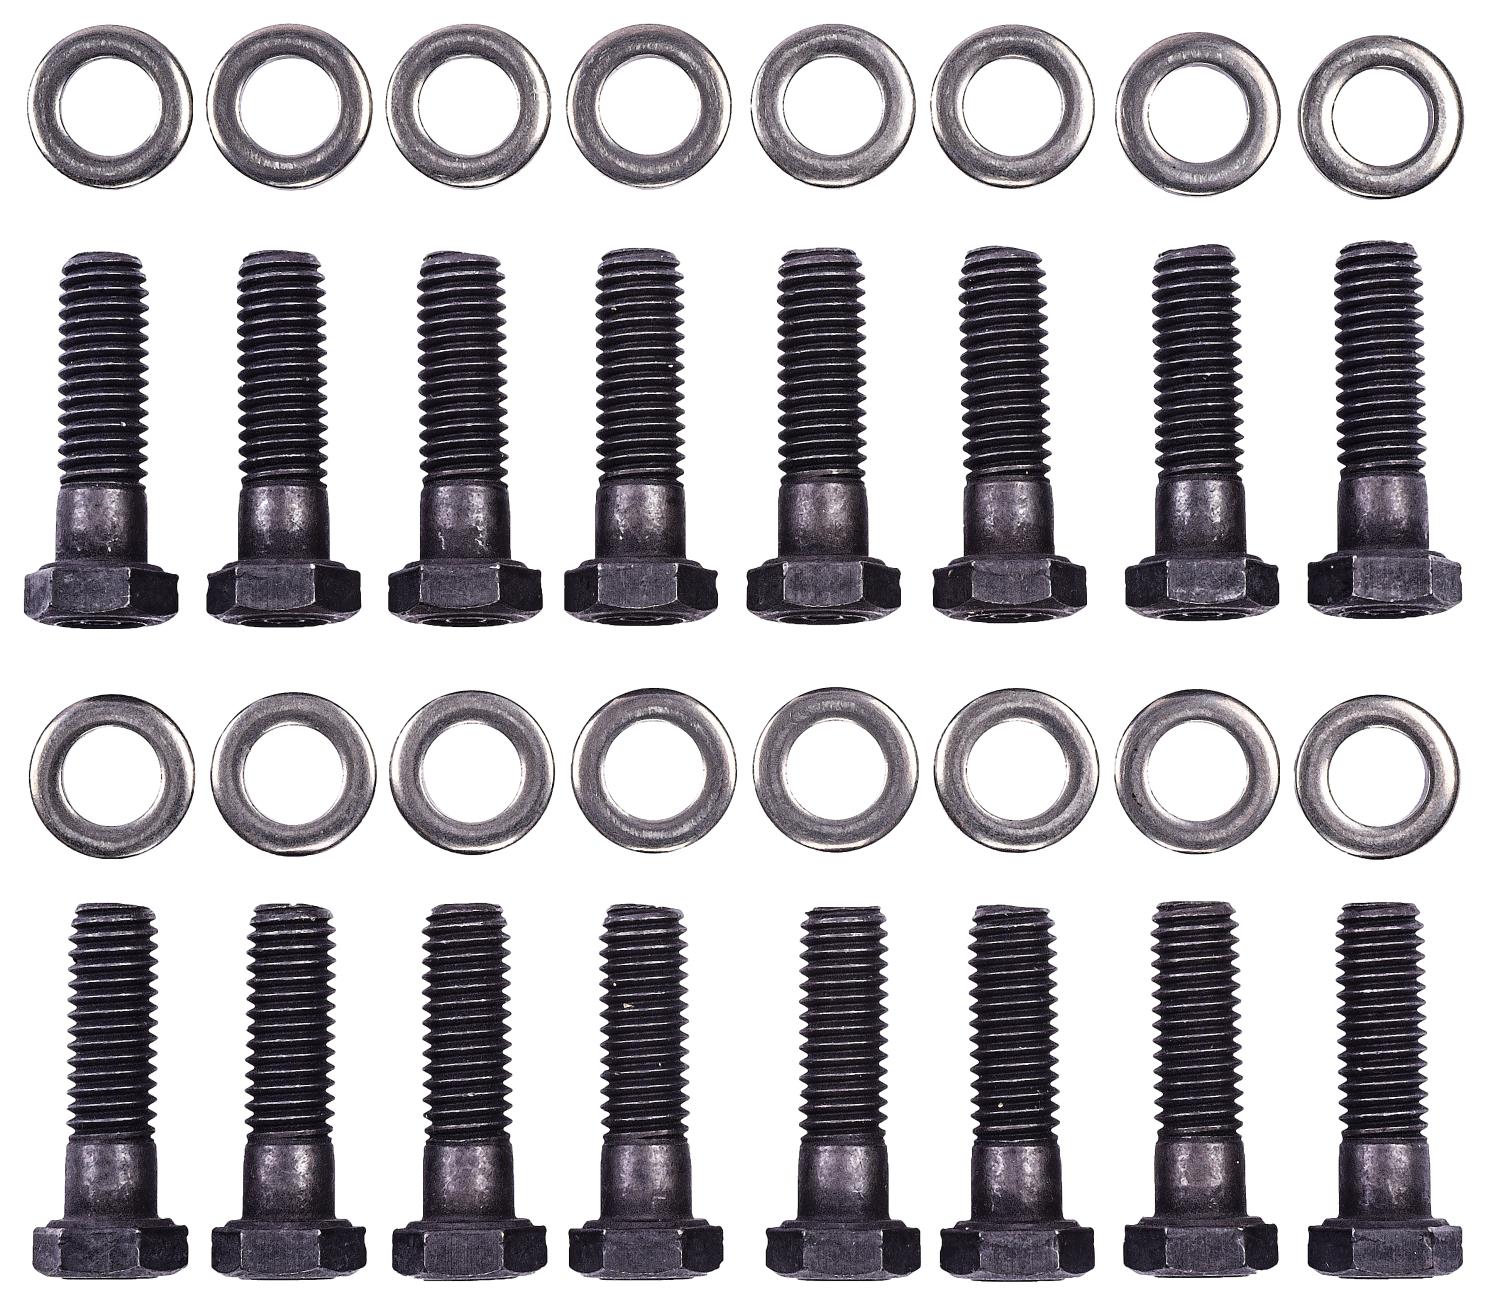 Exhaust Manifold Bolt Kit for 1965-1967 Big Block Chevrolet Engines